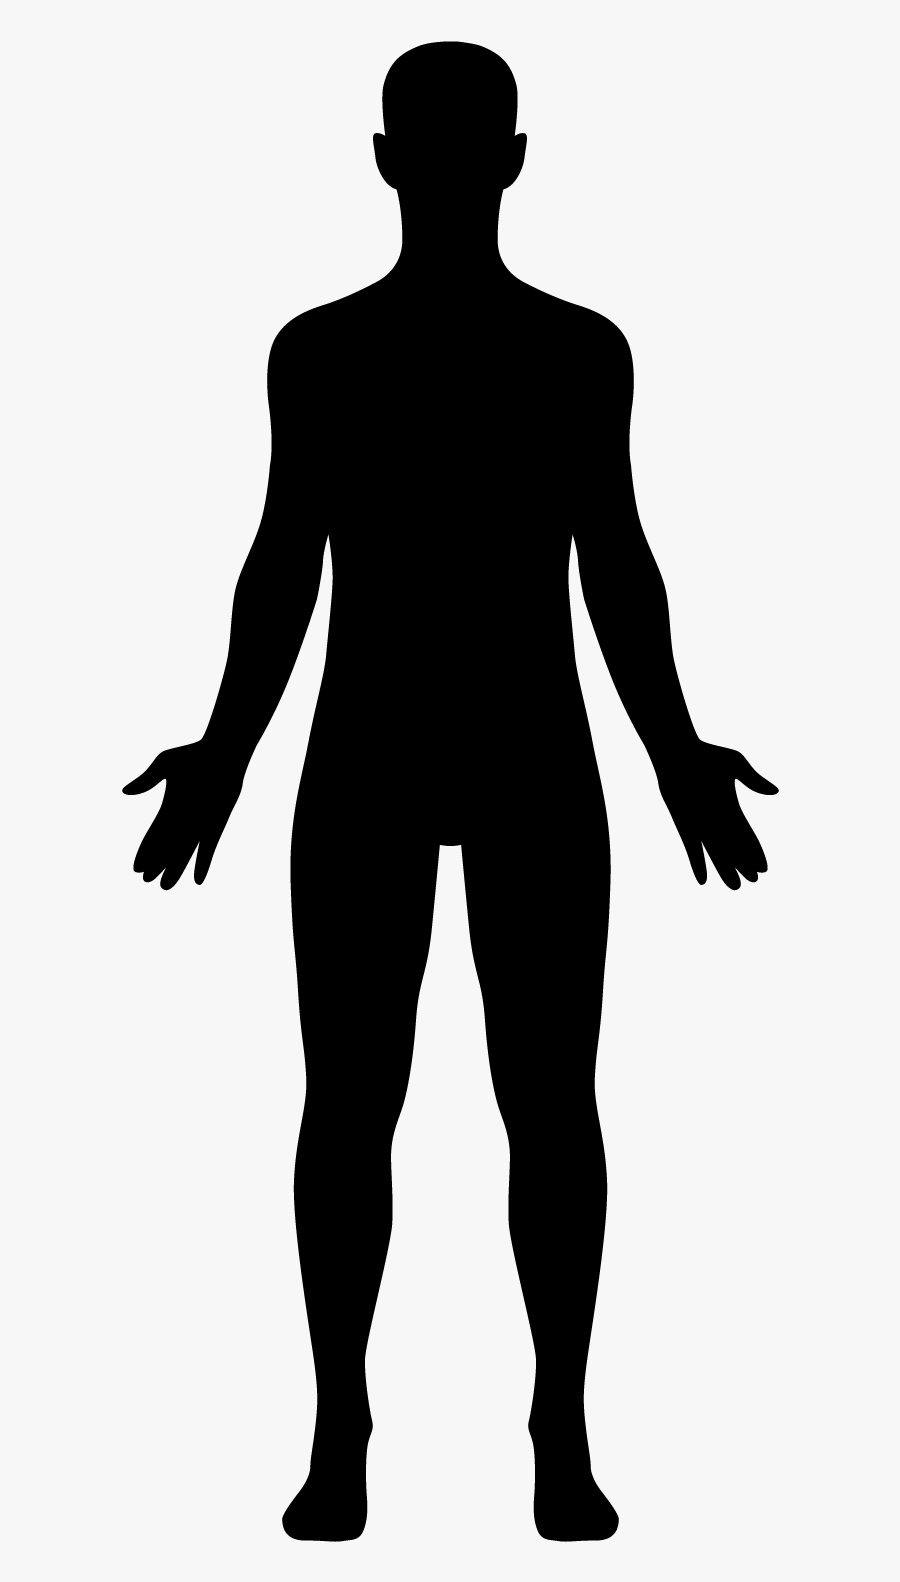 Human Body Png Icon - Human Body Silhouette Png, Transparent Clipart